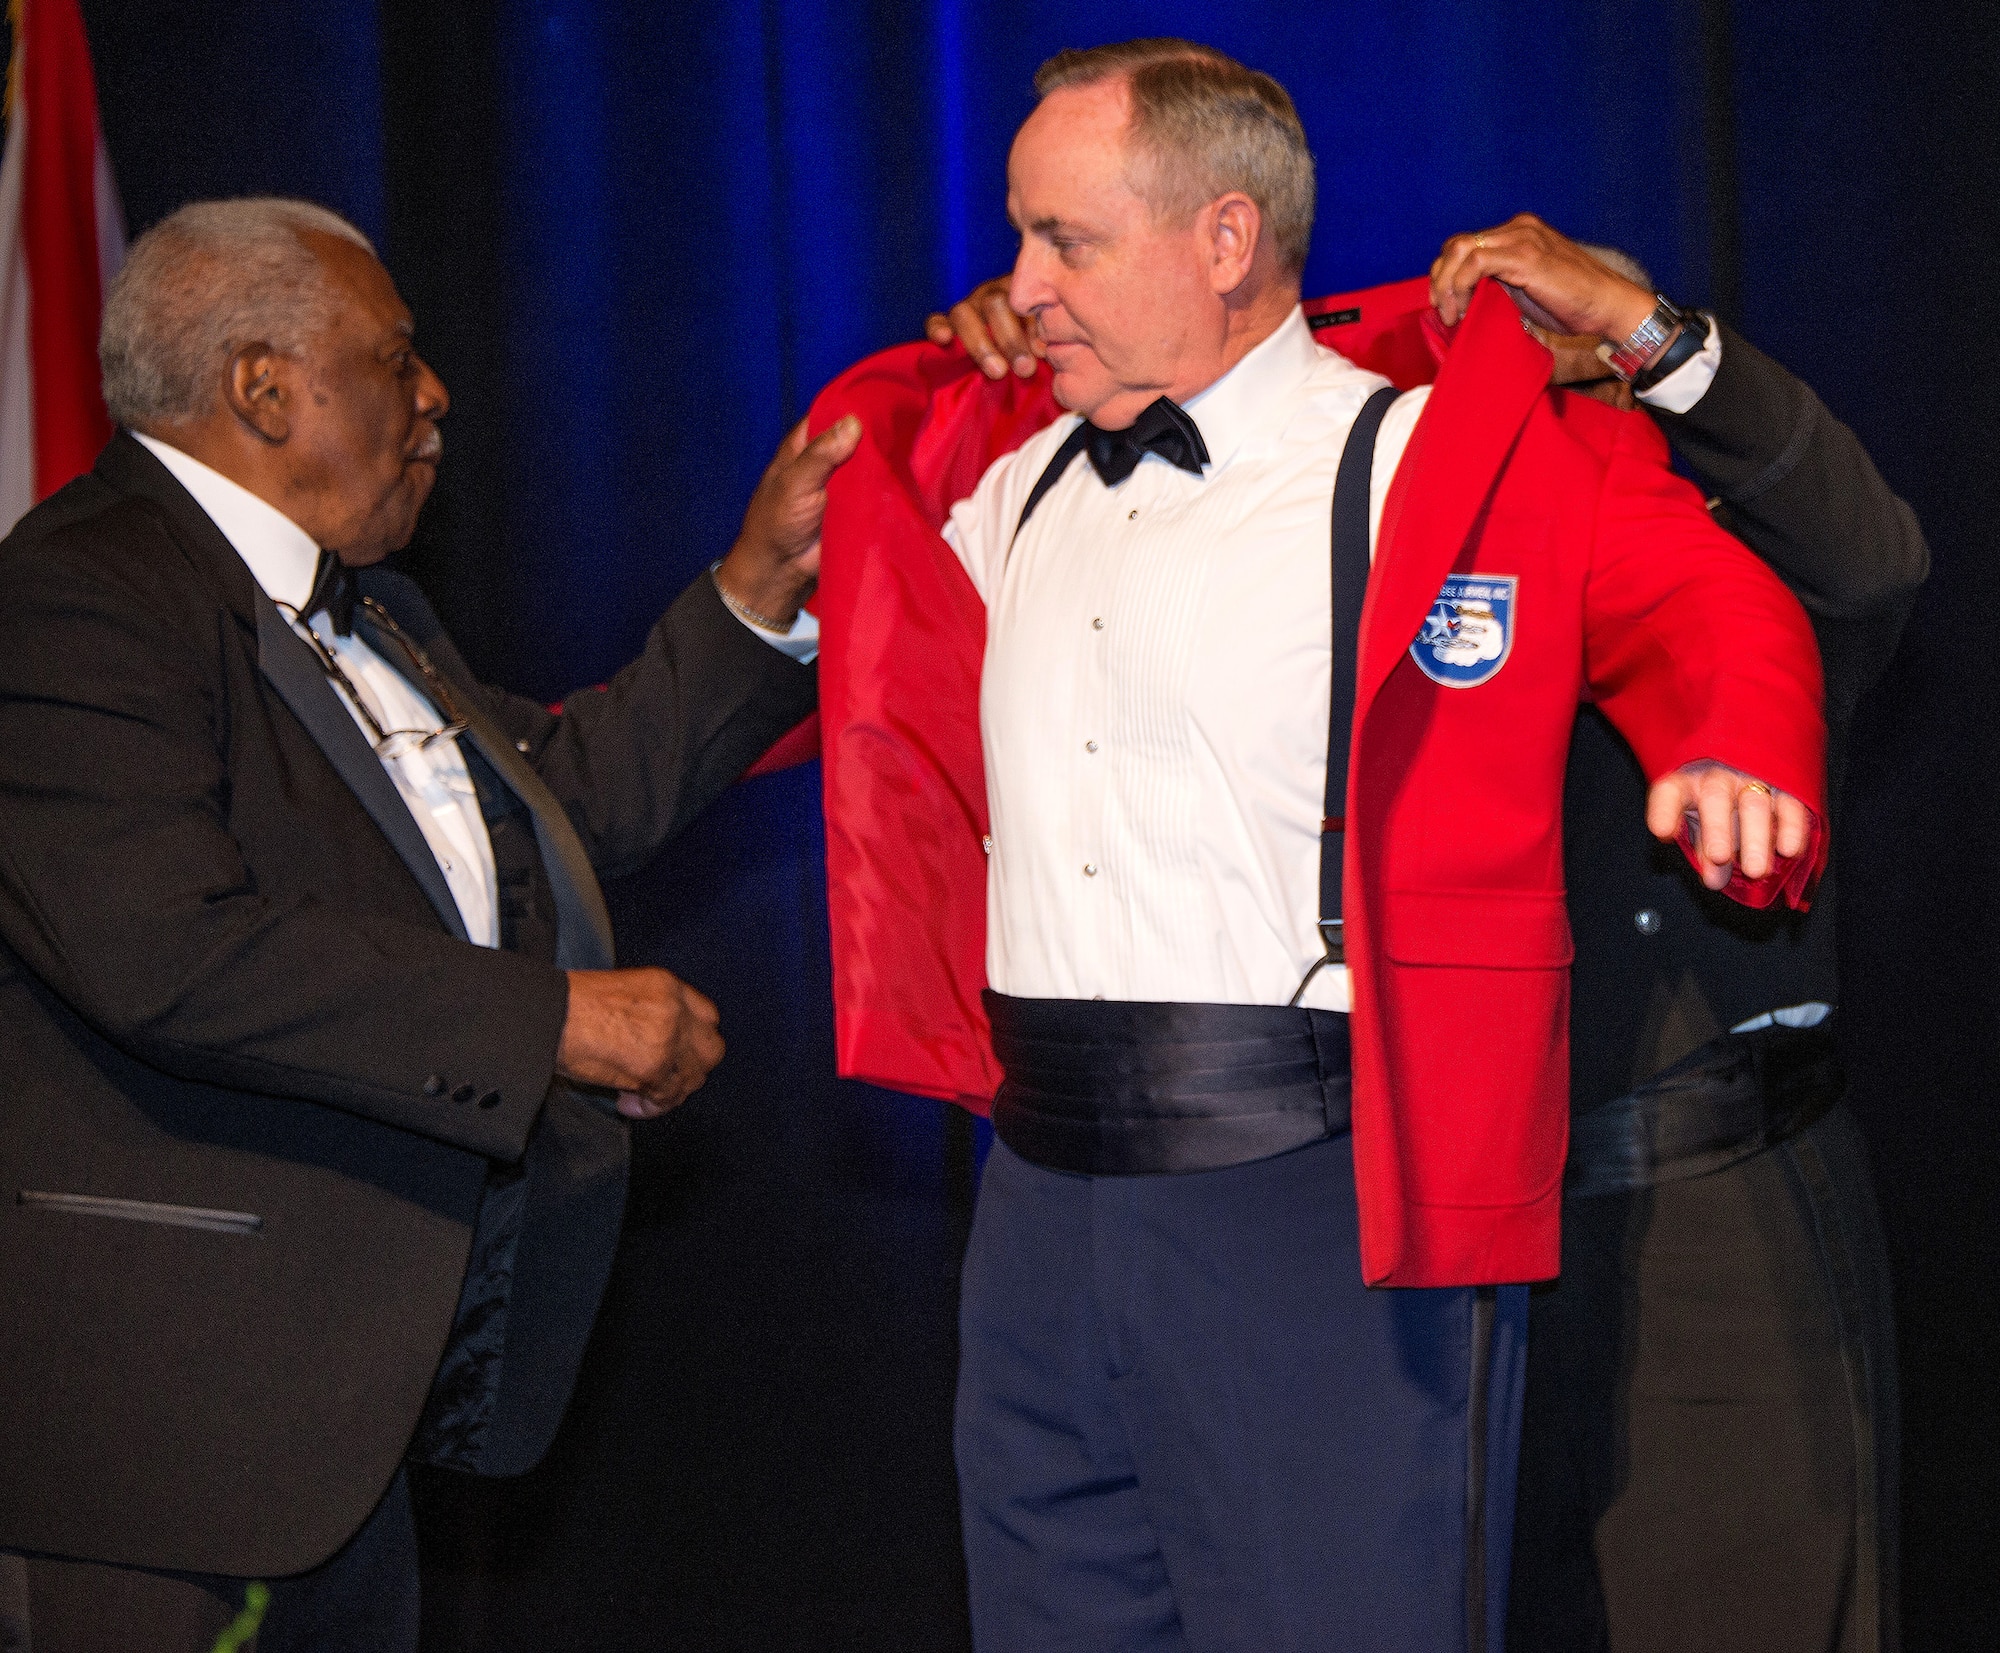 Air Force Chief of Staff Gen. Mark A. Welsh III is inducted as an honorary Tuskegee Airman during the Tuskegee Airmen Foundation’s 75th anniversary commemoration in Montgomery, Ala., March 22, 2016. (U.S. Air Force photo/Trey Ward) 